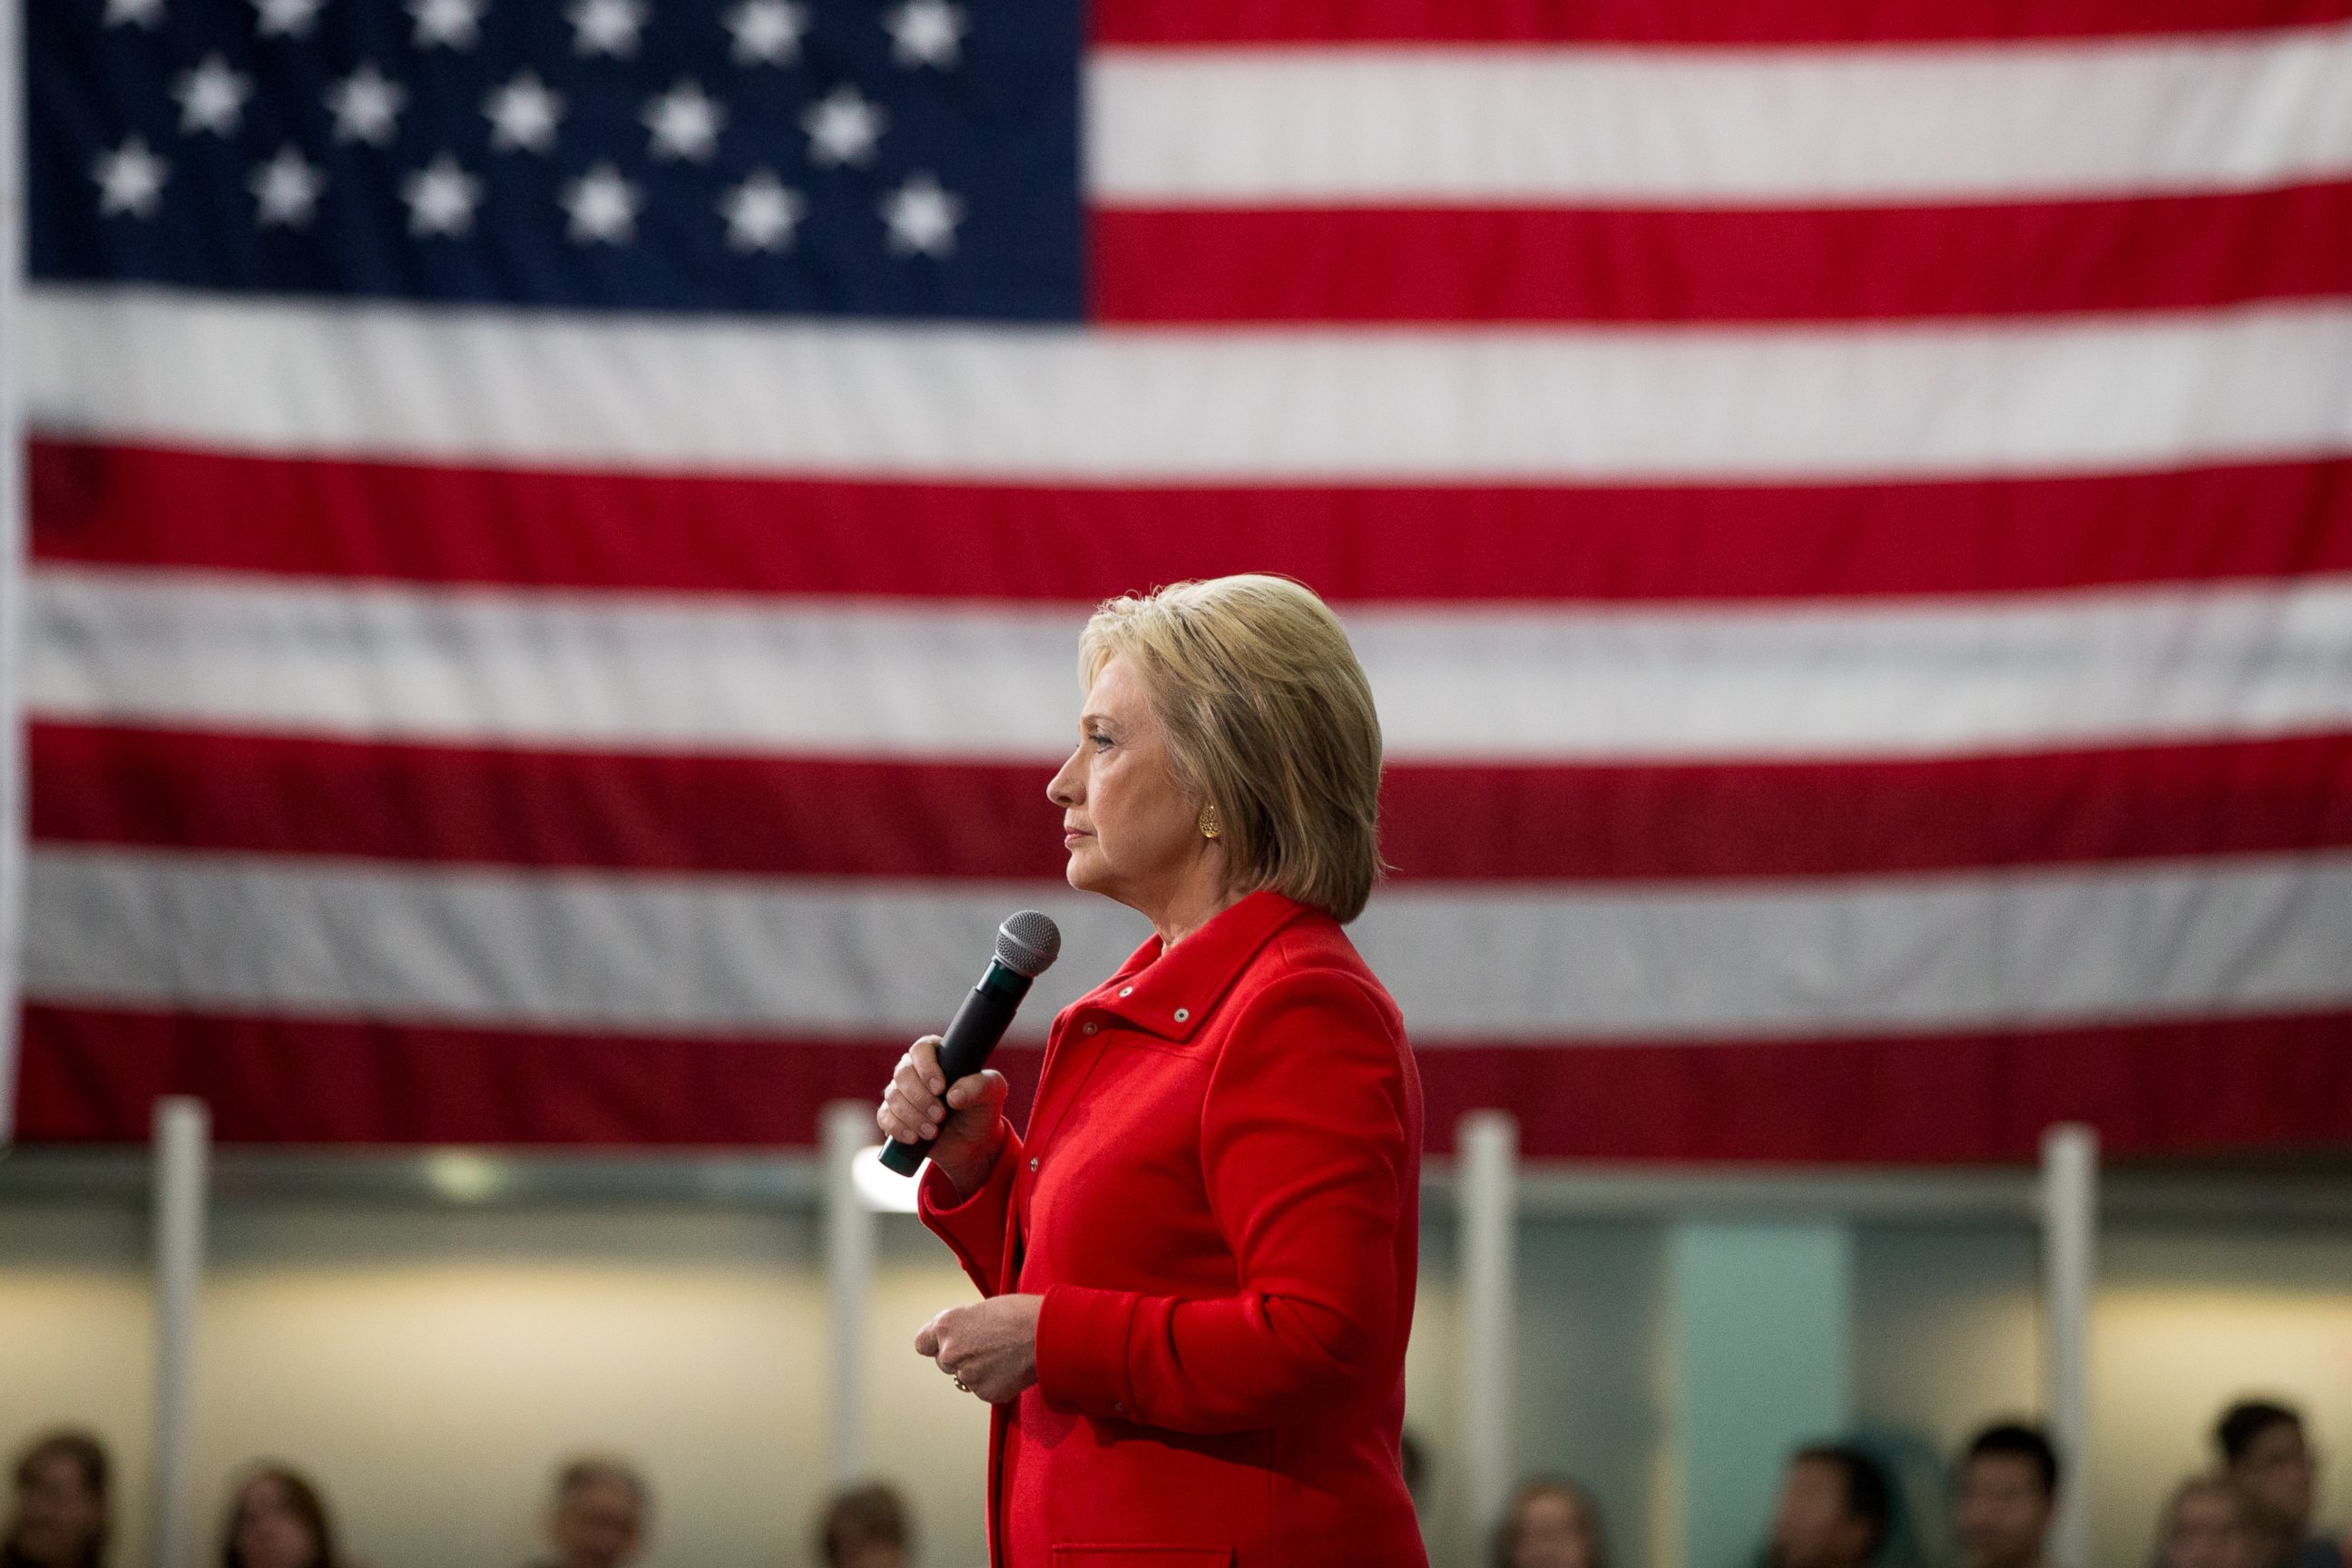 PHOTO: Democratic presidential candidate Hillary Clinton speaks at a rally at Iowa State University in Ames, Iowa, Jan. 30, 2016.